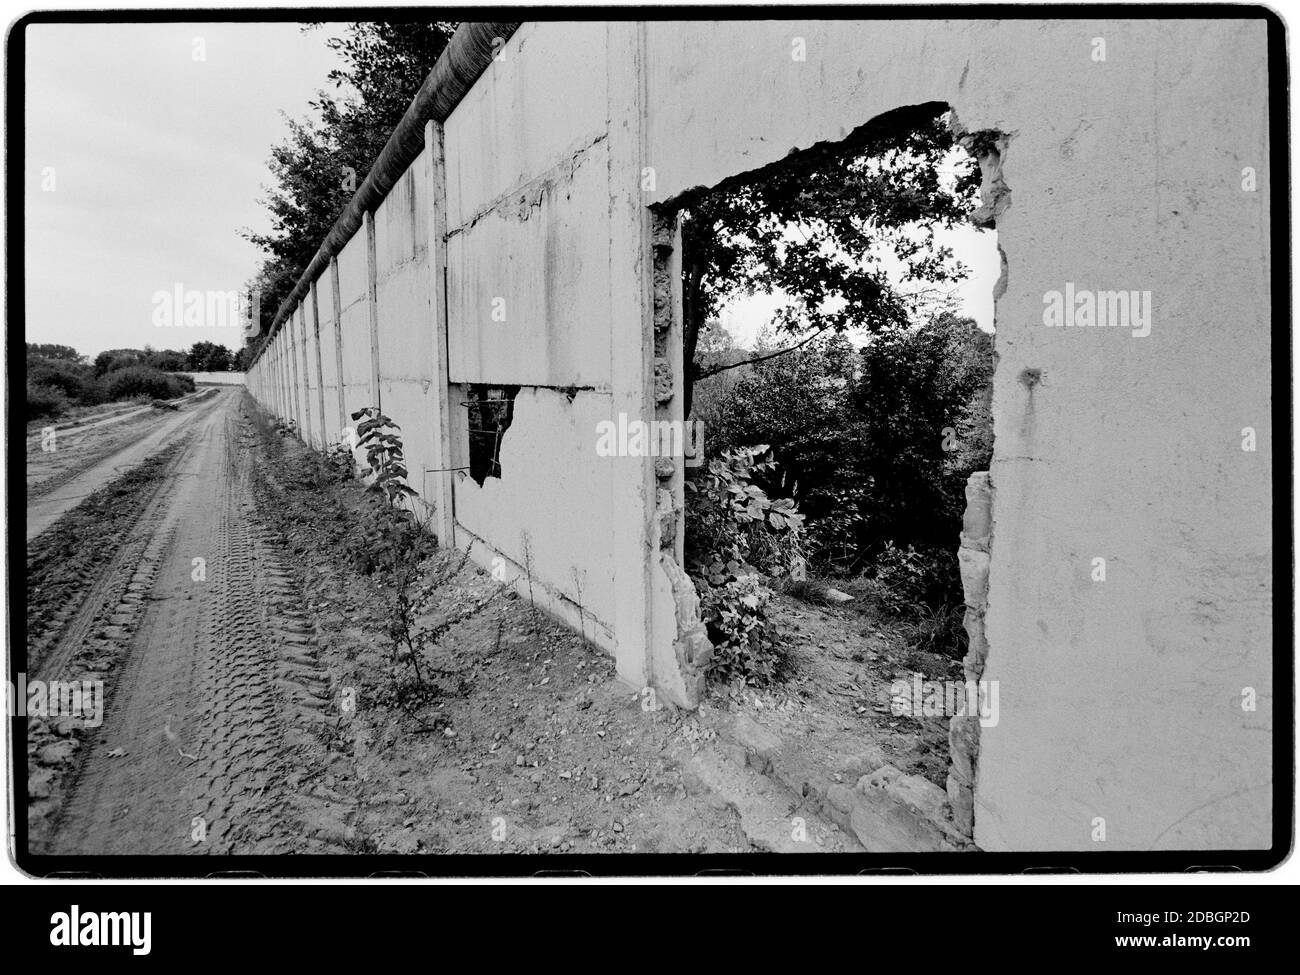 East Germany 1990 scanned in 2020 The remains of the Wall near Hanum on the border between former East and West Germany. Hanum is a village and a former municipality in the district Altmarkkreis Salzwedel, in Saxony-Anhalt, Germany. Since 1 January 2010, it has been a part of the municipality Jübar East Germany, Deutsche Demokratische Republik the DDR after the fall of the Wall but before reunification March 1990 and scanned in 2020.East Germany, officially the German Democratic Republic, was a country that existed from 1949 to 1990, the period when the eastern portion of Germany was part of t Stock Photo